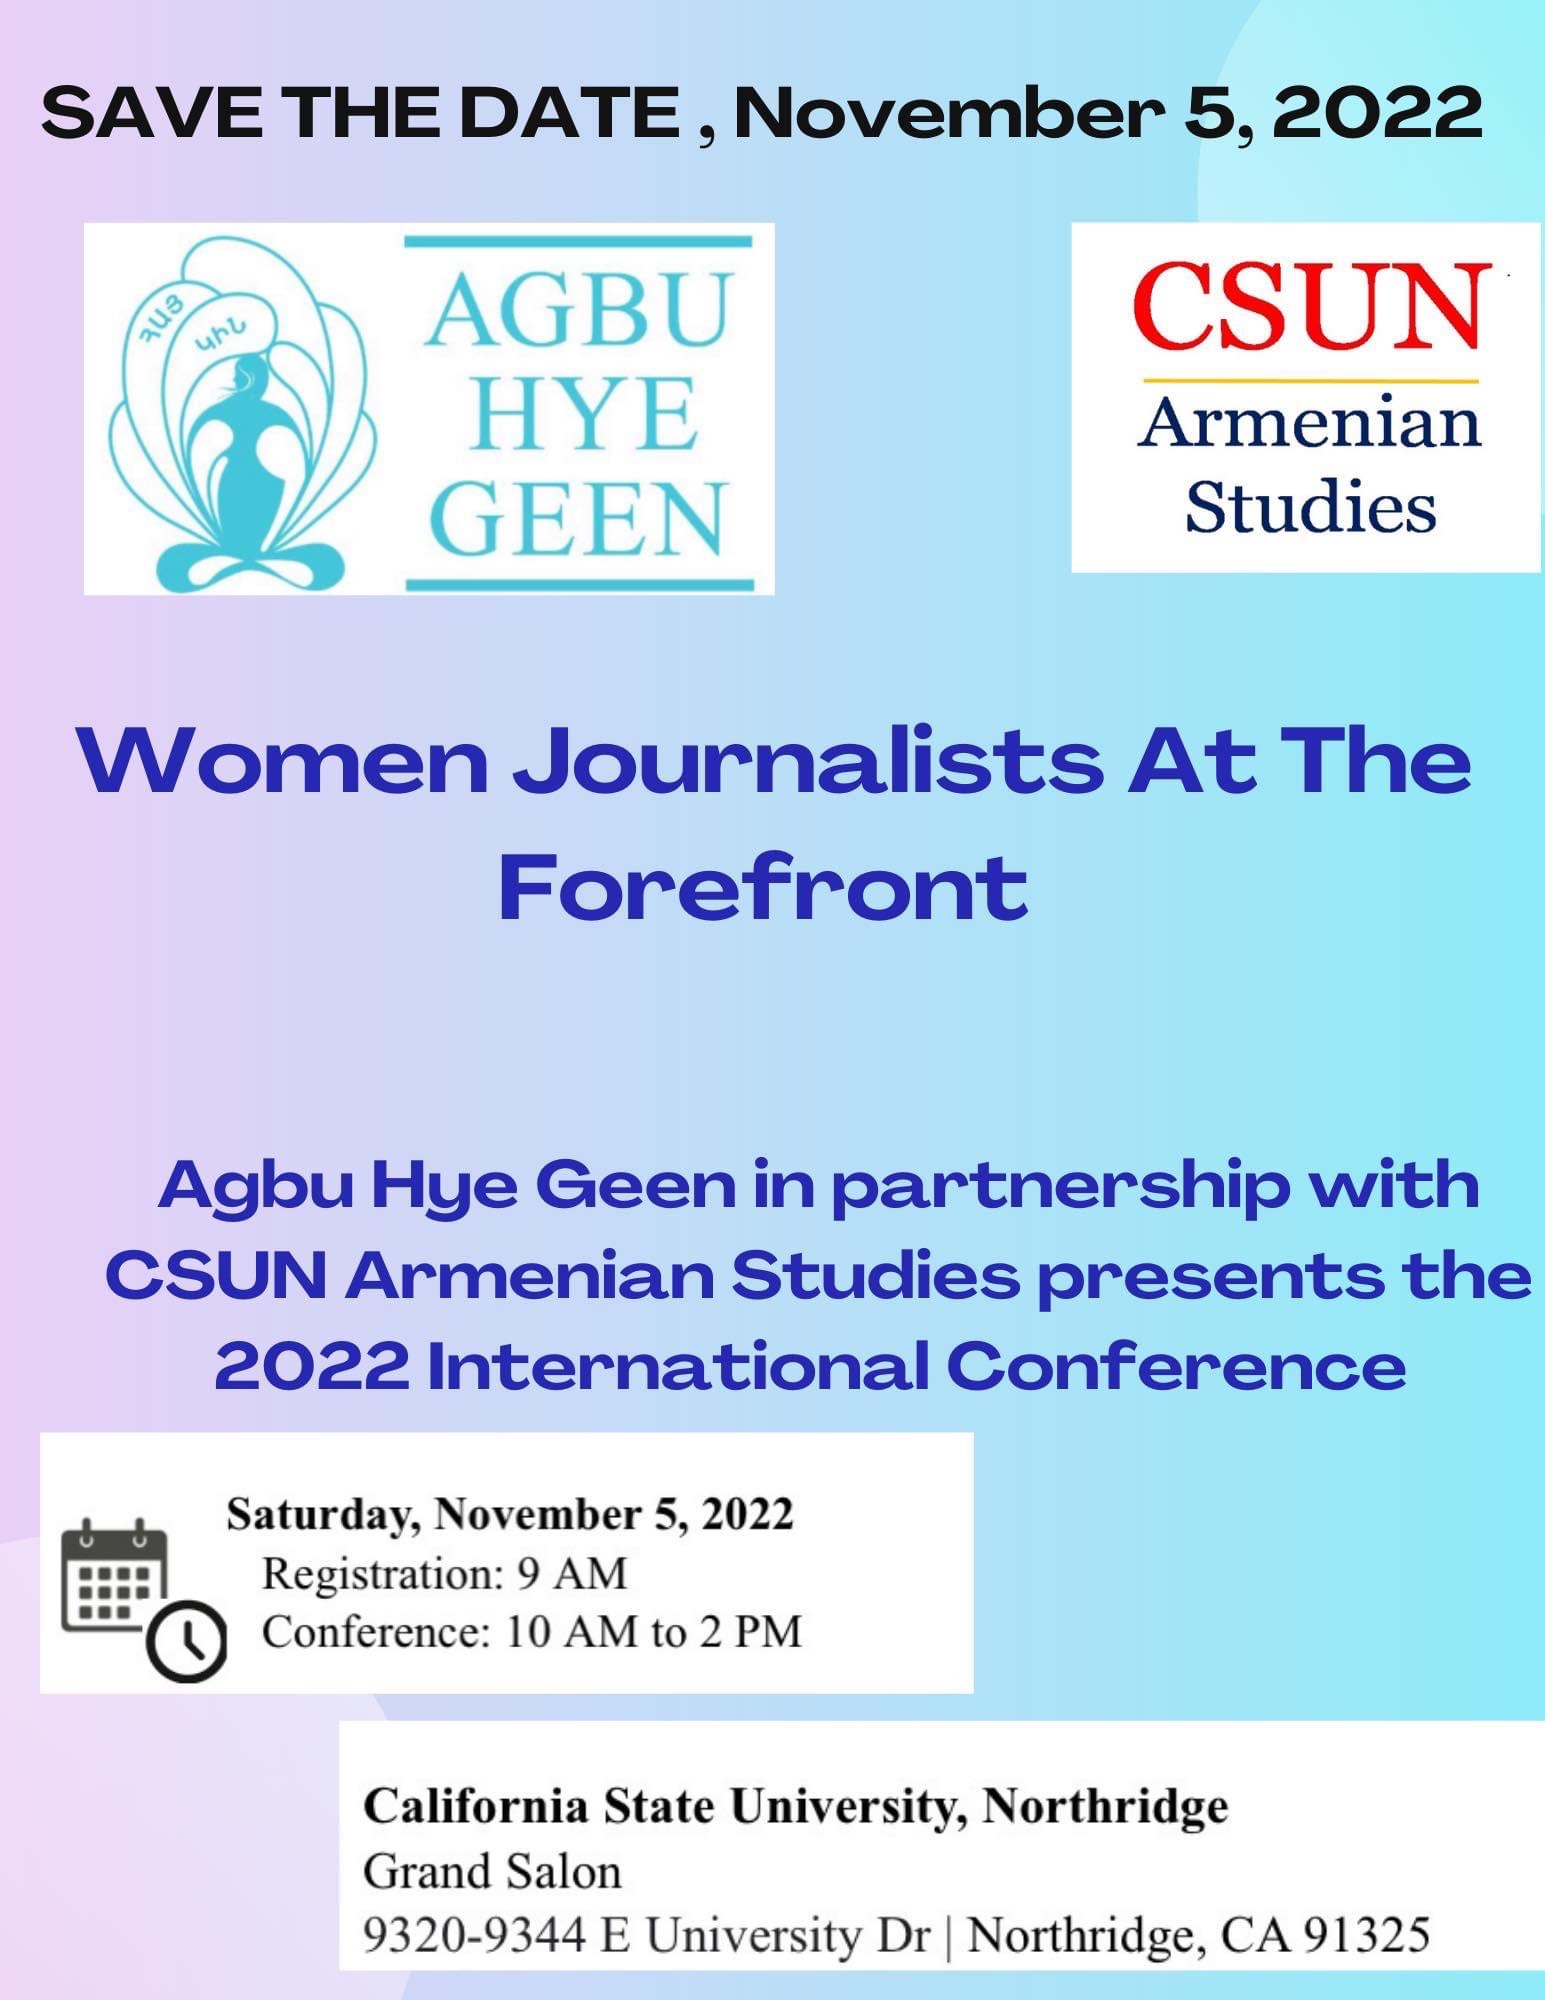 AGBU Hye Geen presents: Women Journalists at the Forefront